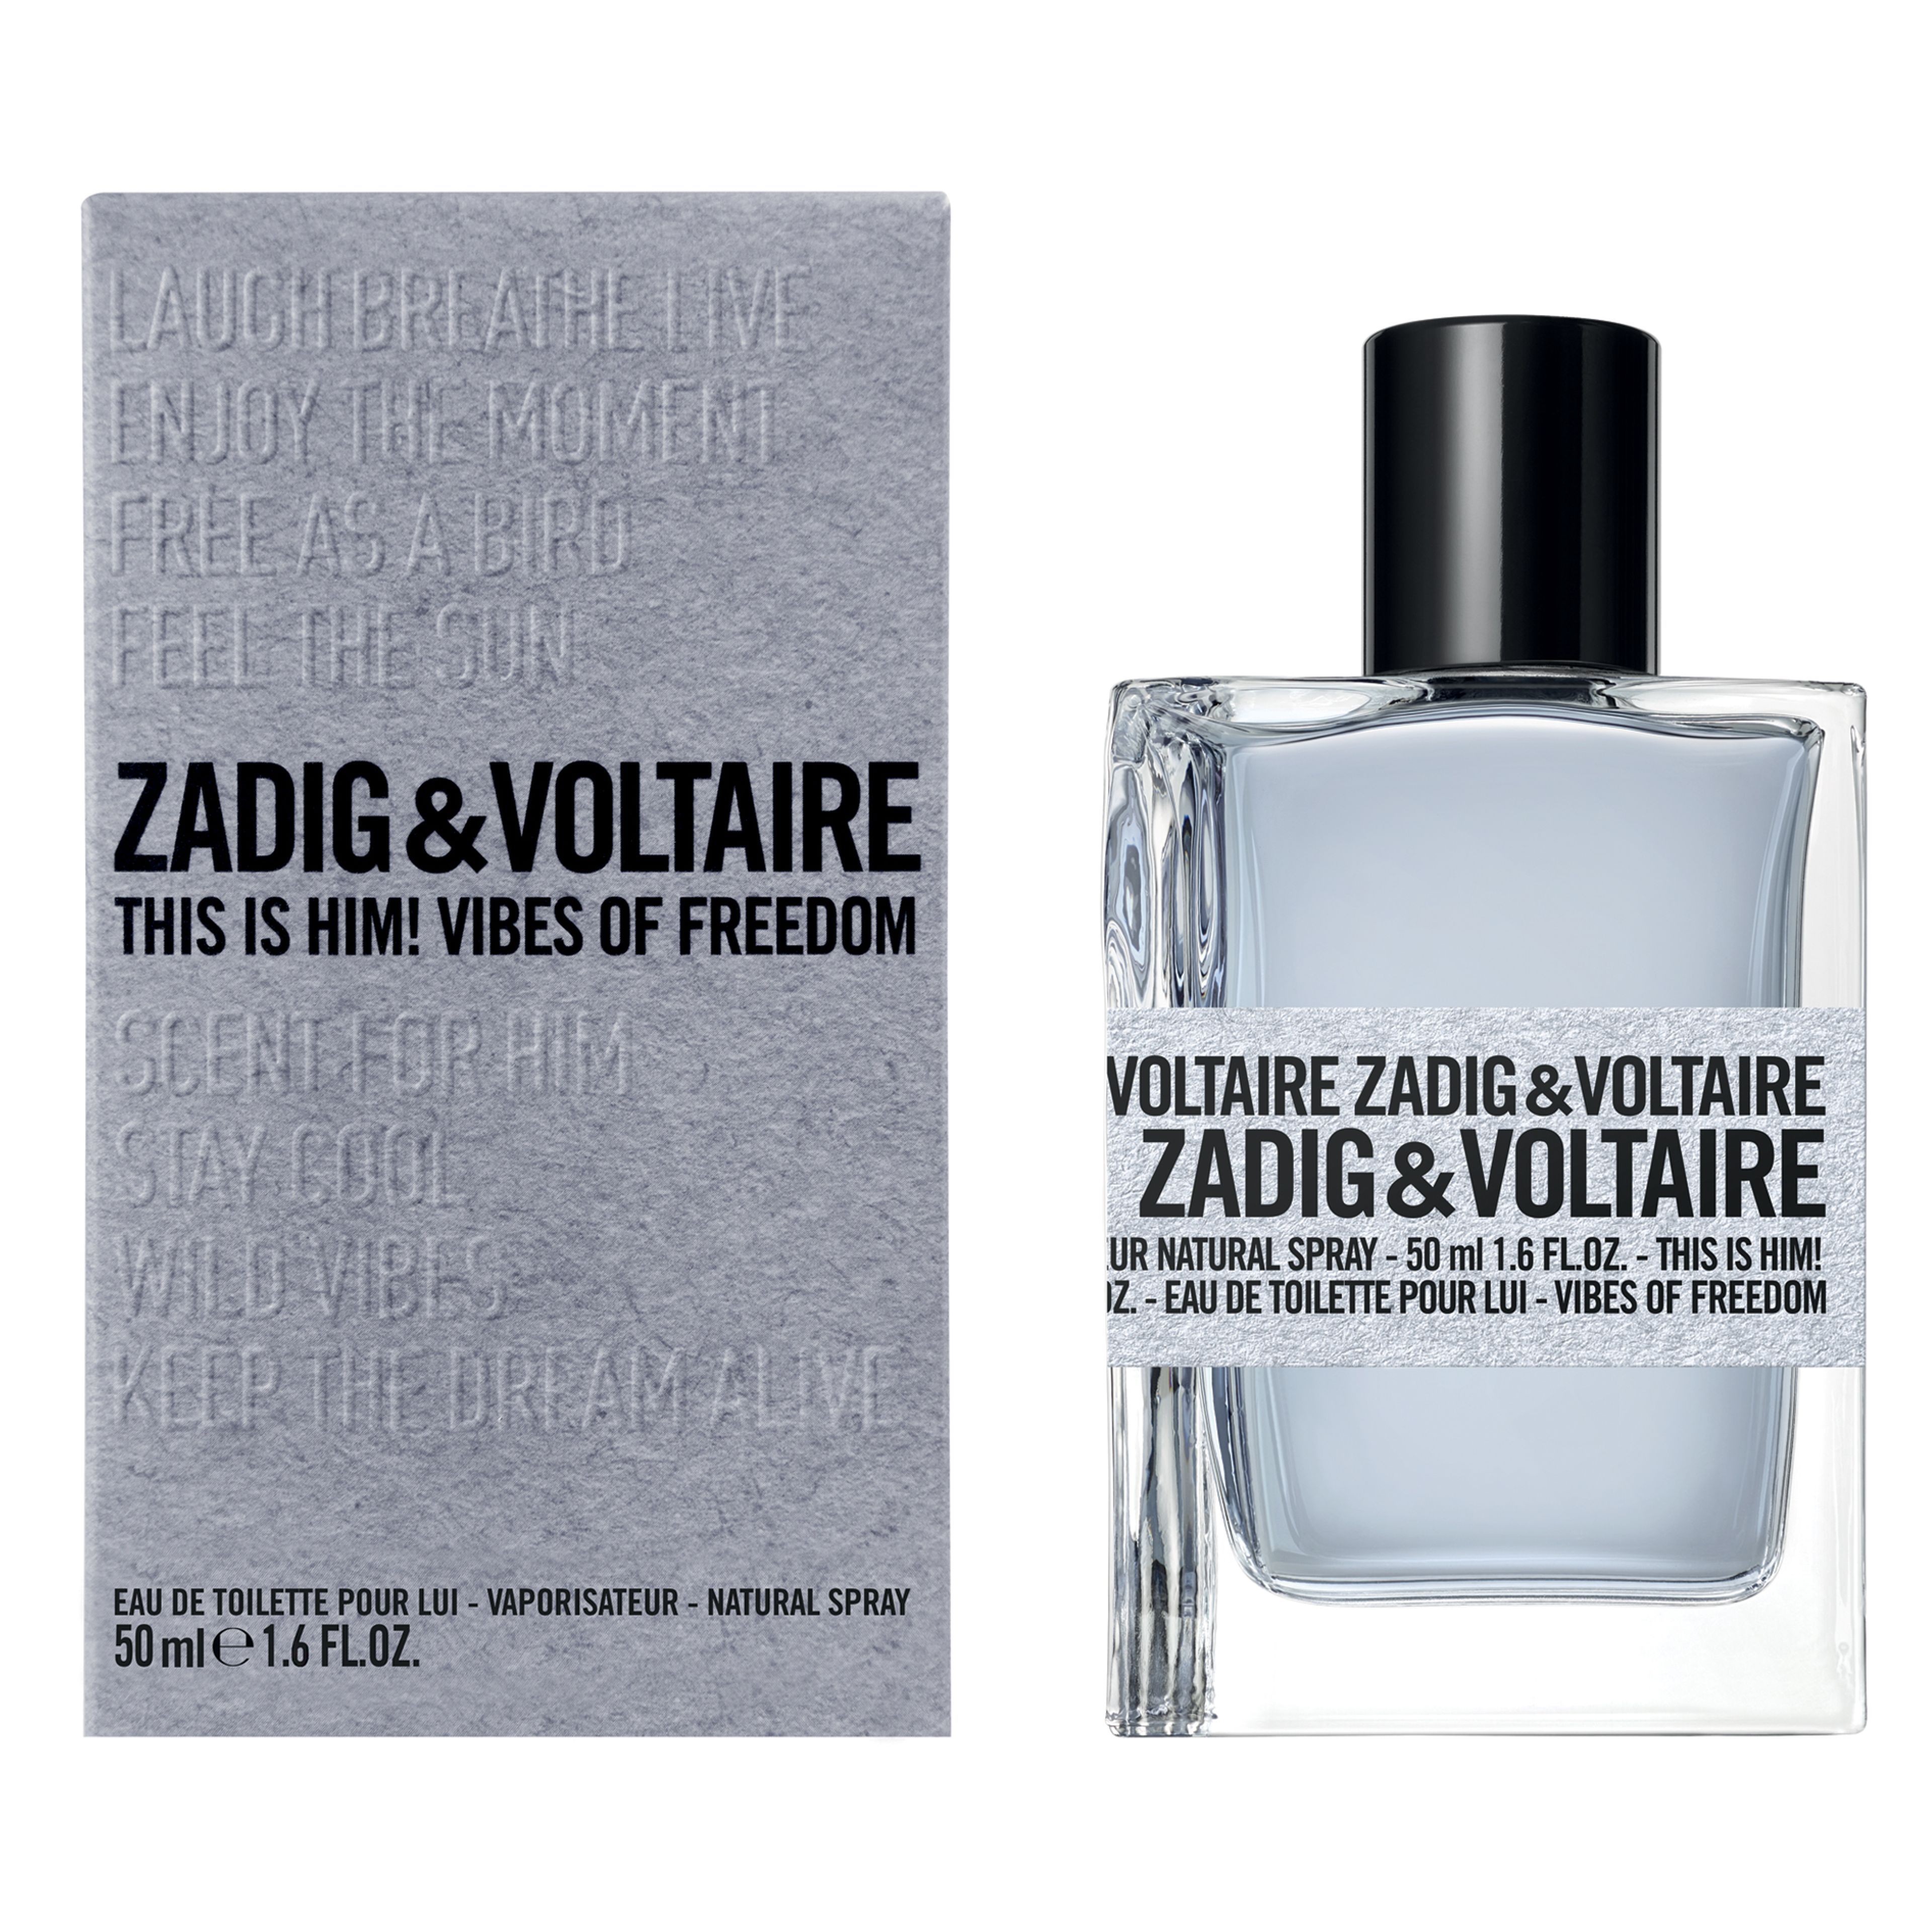 Zadig & Voltaire This Is Him! Vibes Of Freedom 2